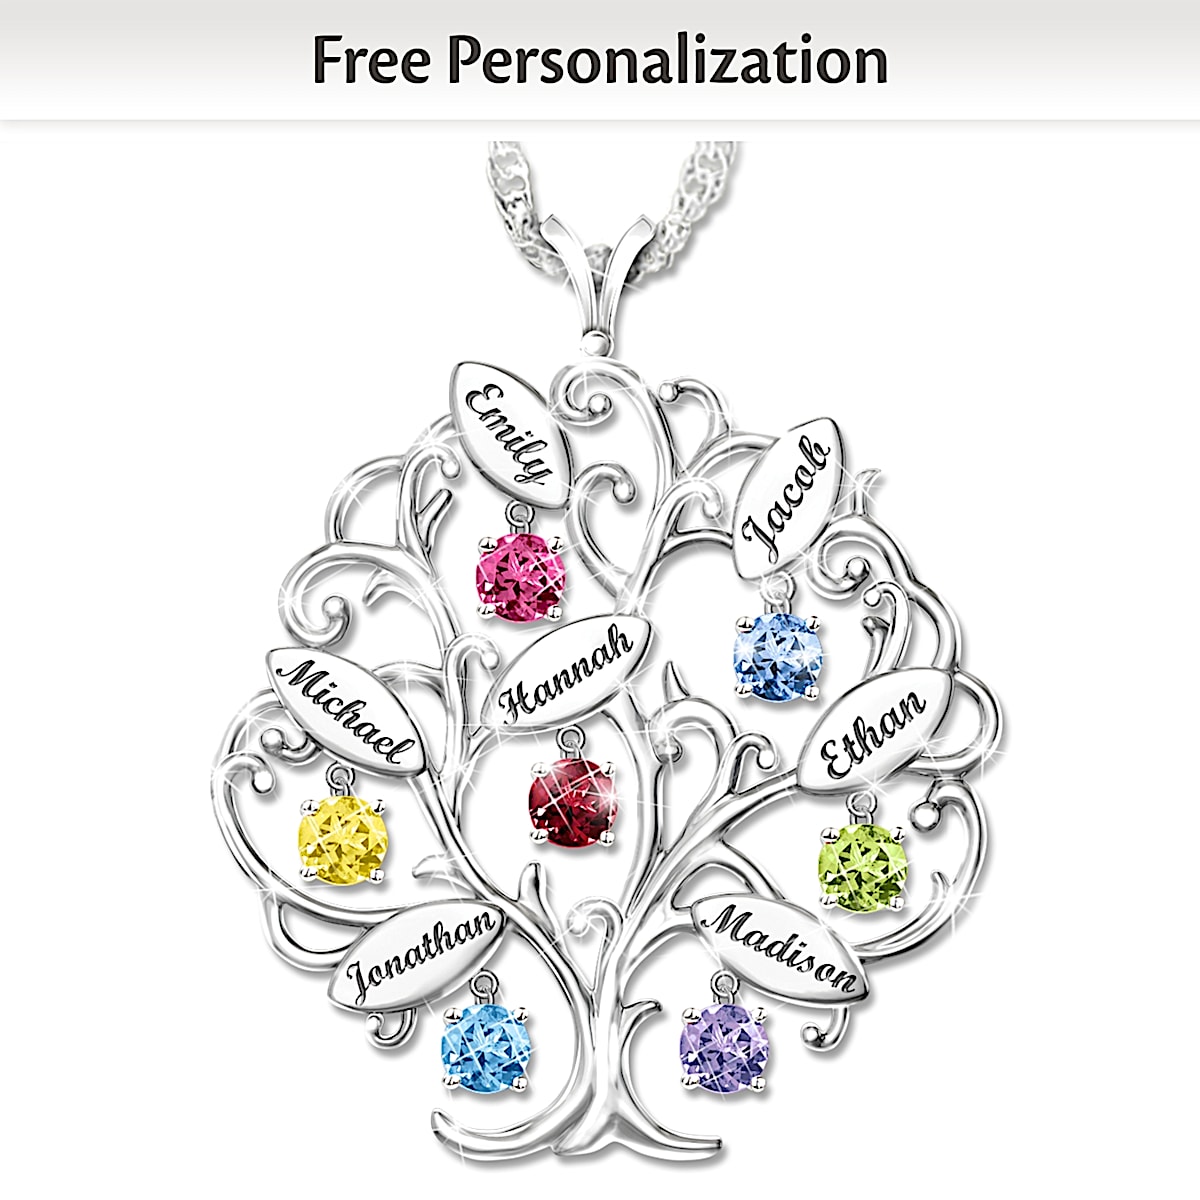 Personalized Birthstone Family Tree Pendant Necklace: Family of Love